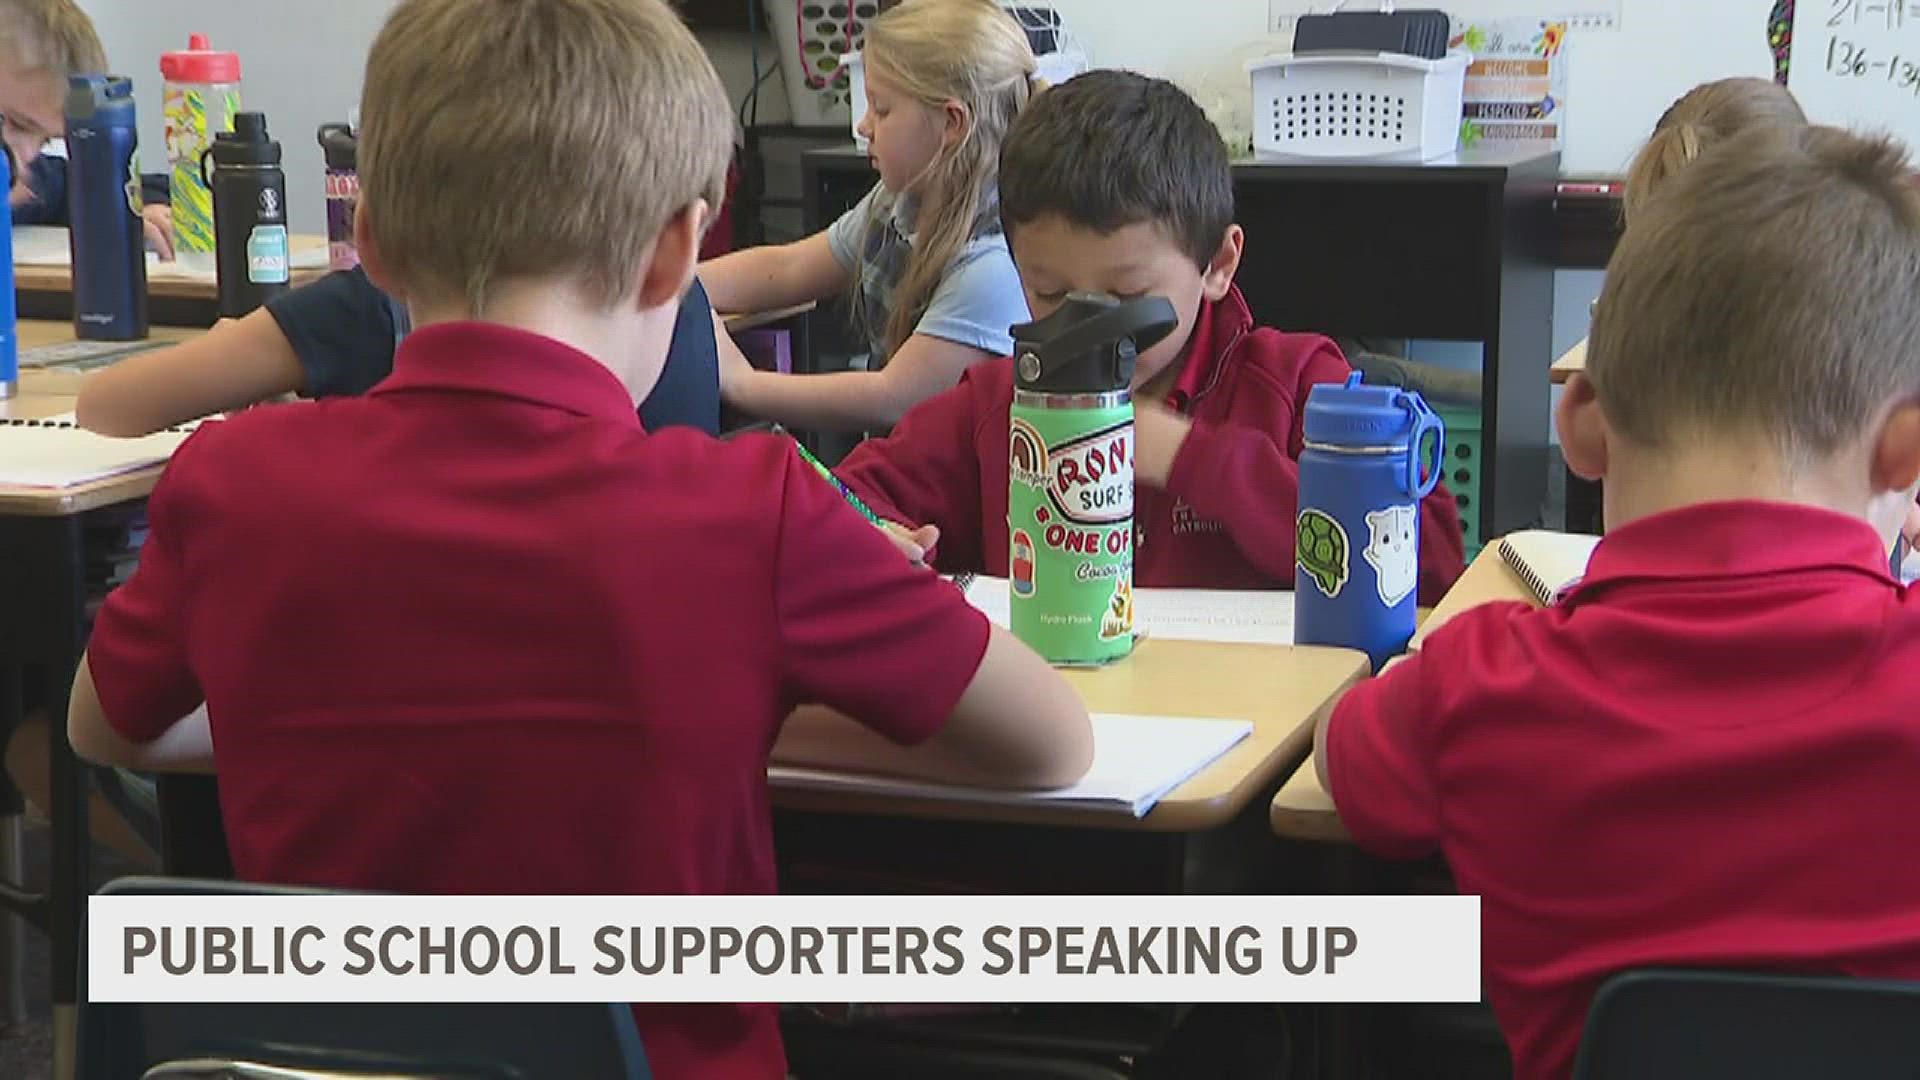 Gov. Kim Reynolds is continuing her push for private school vouchers in the state of Iowa, while voices in public education continue to condemn the idea.